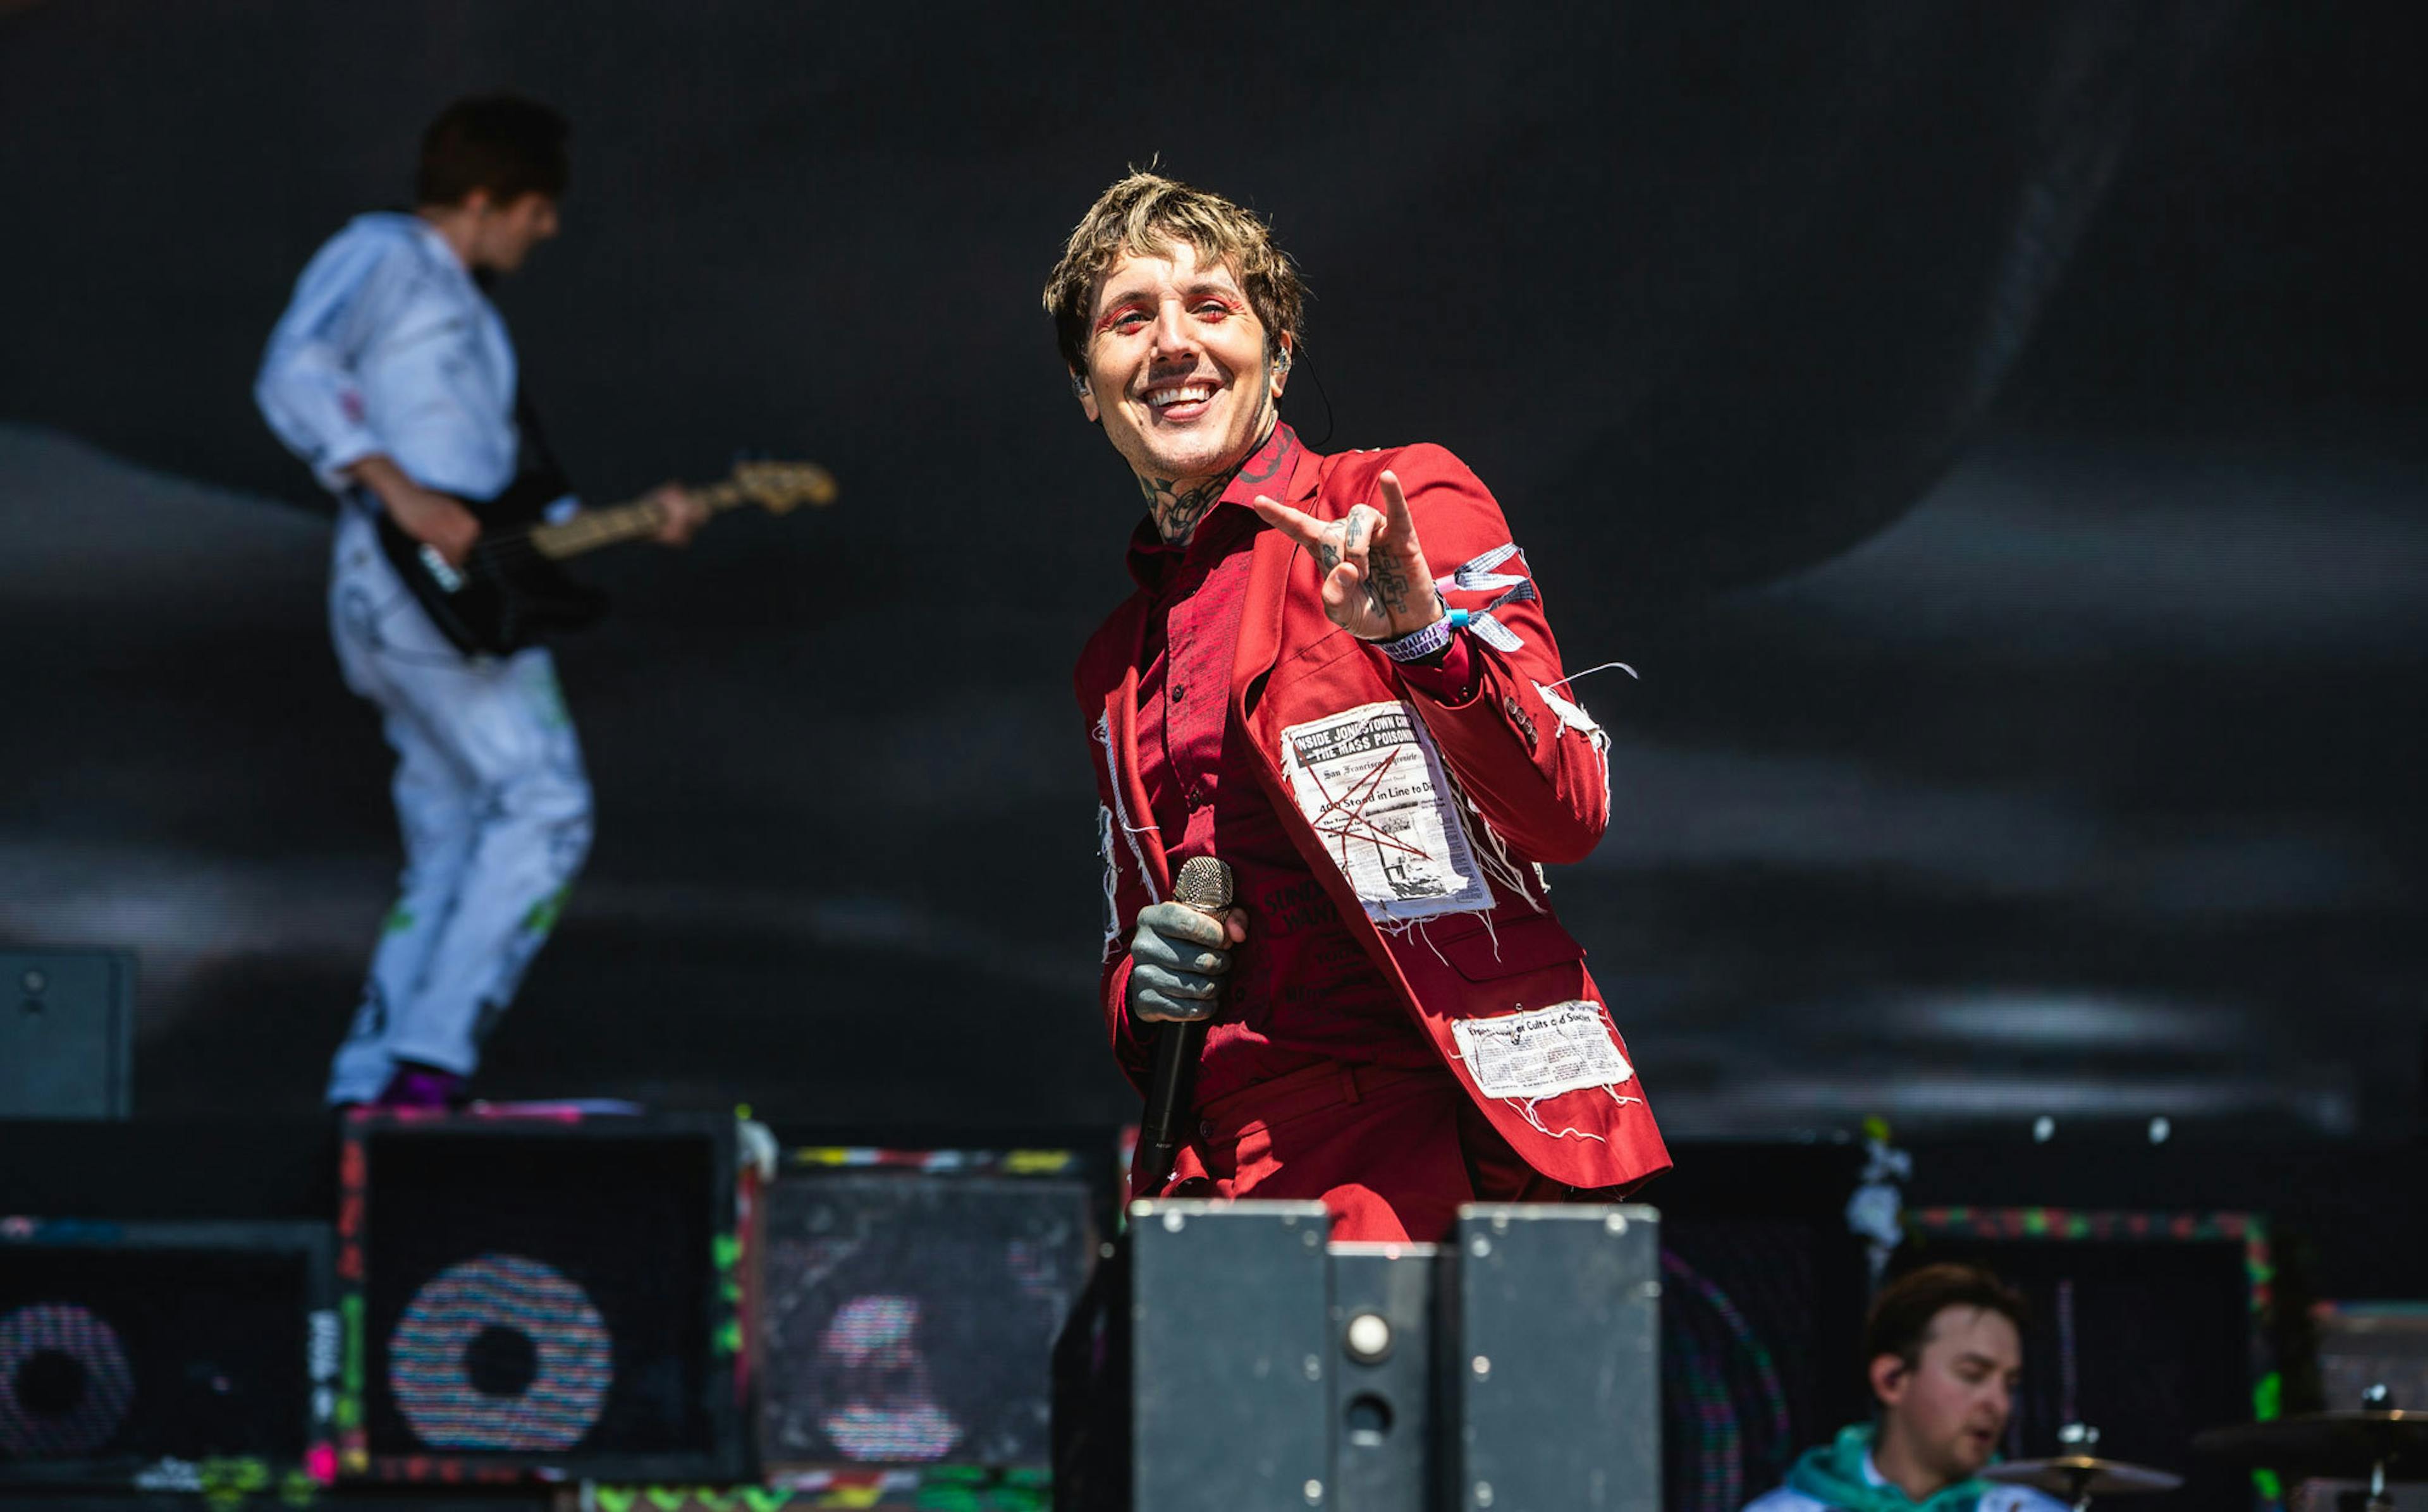 Are Bring Me The Horizon Working With Halsey On Music Together?